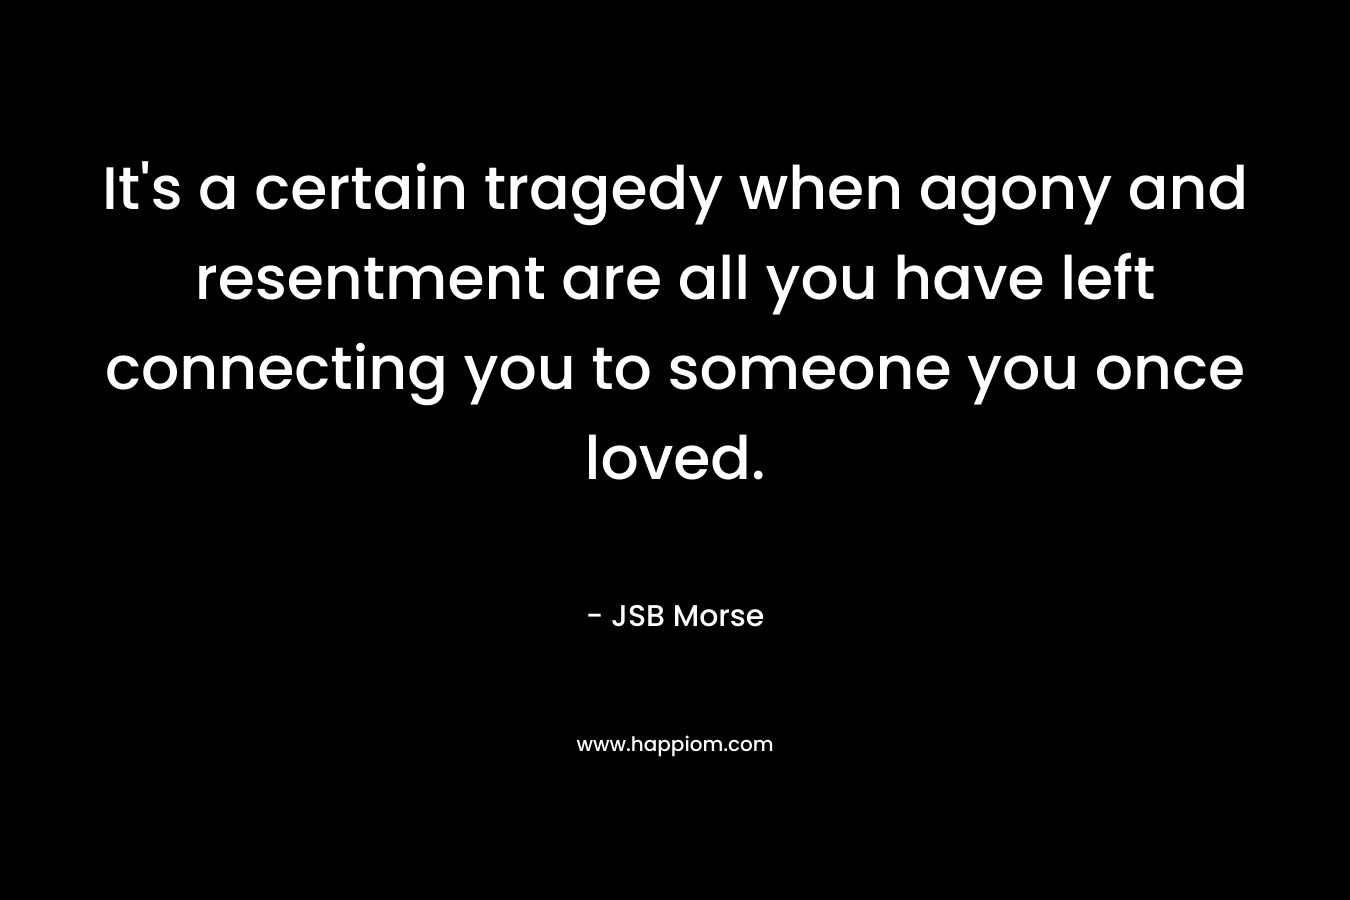 It’s a certain tragedy when agony and resentment are all you have left connecting you to someone you once loved. – JSB Morse